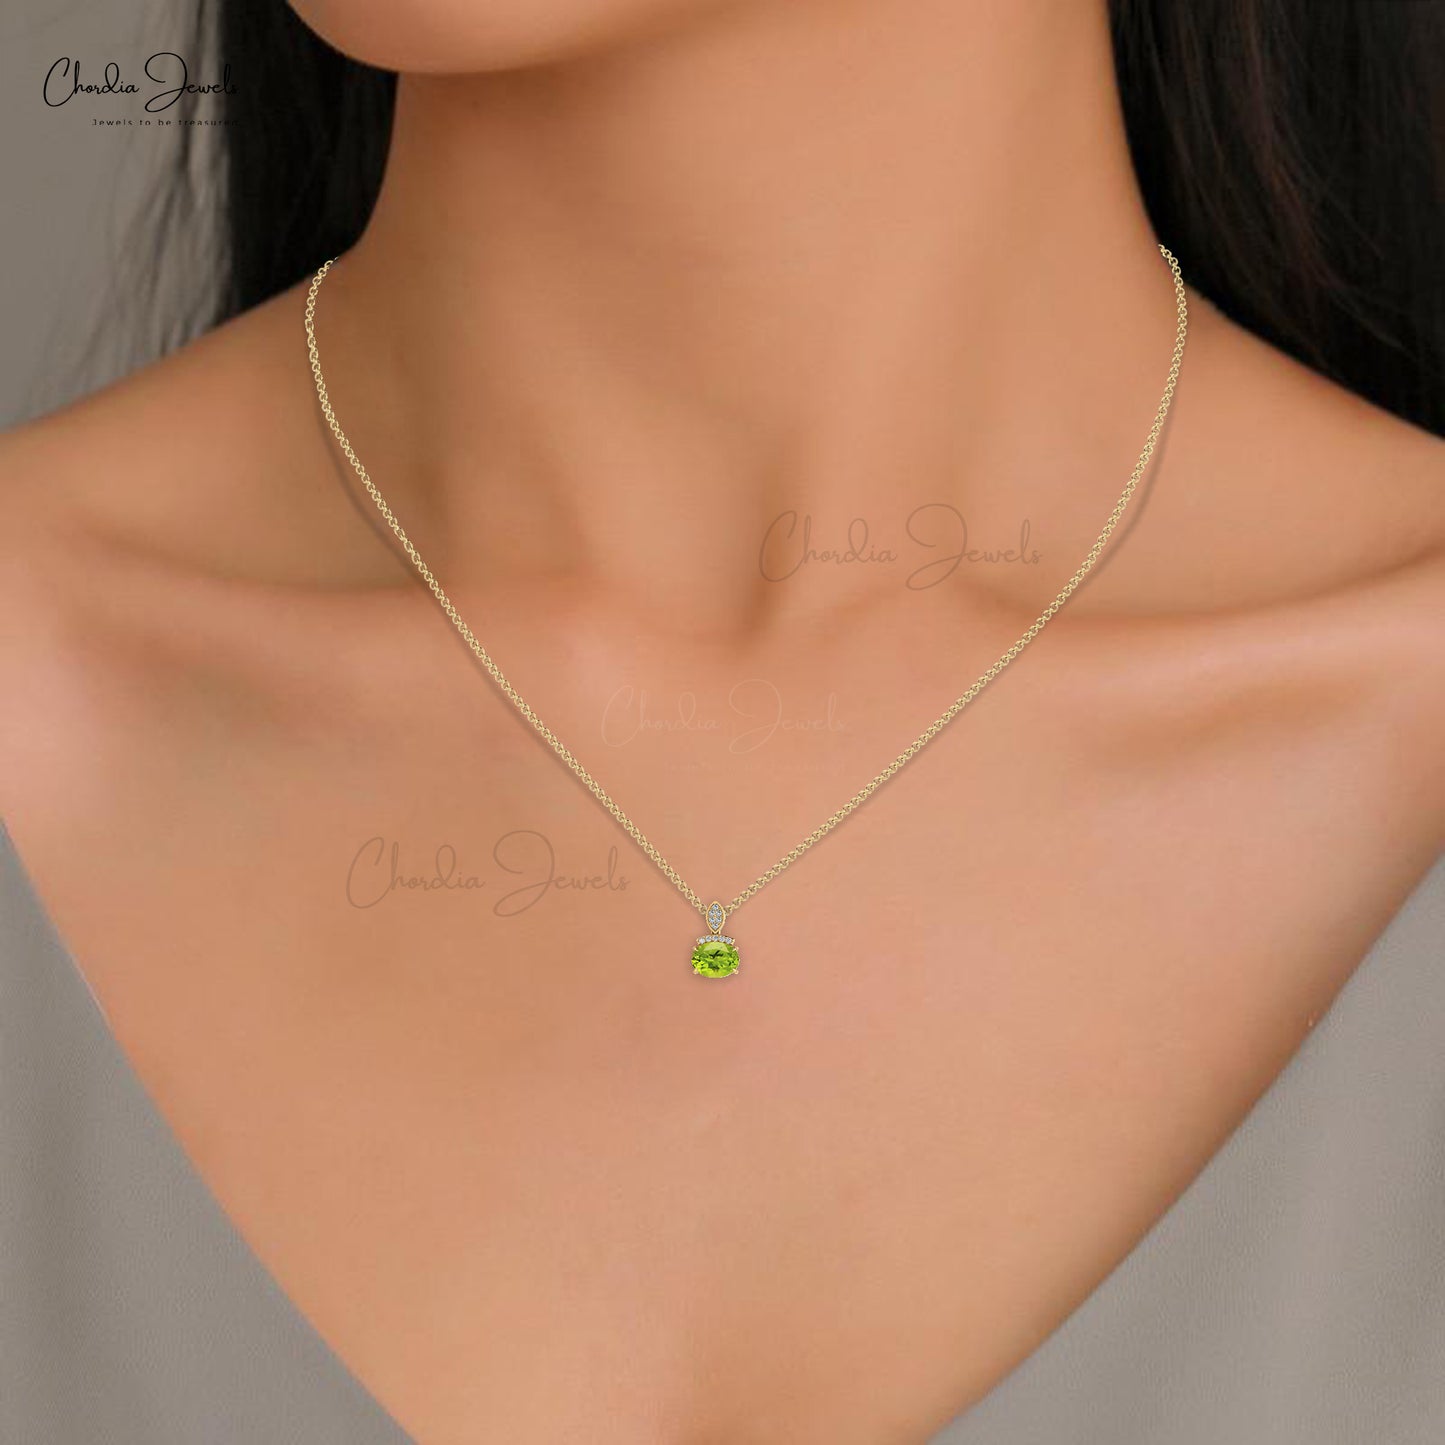 Dainty Pendant With Peridot Gemstone 14k Solid Gold Diamond Accents Pendant For Birthday Gift